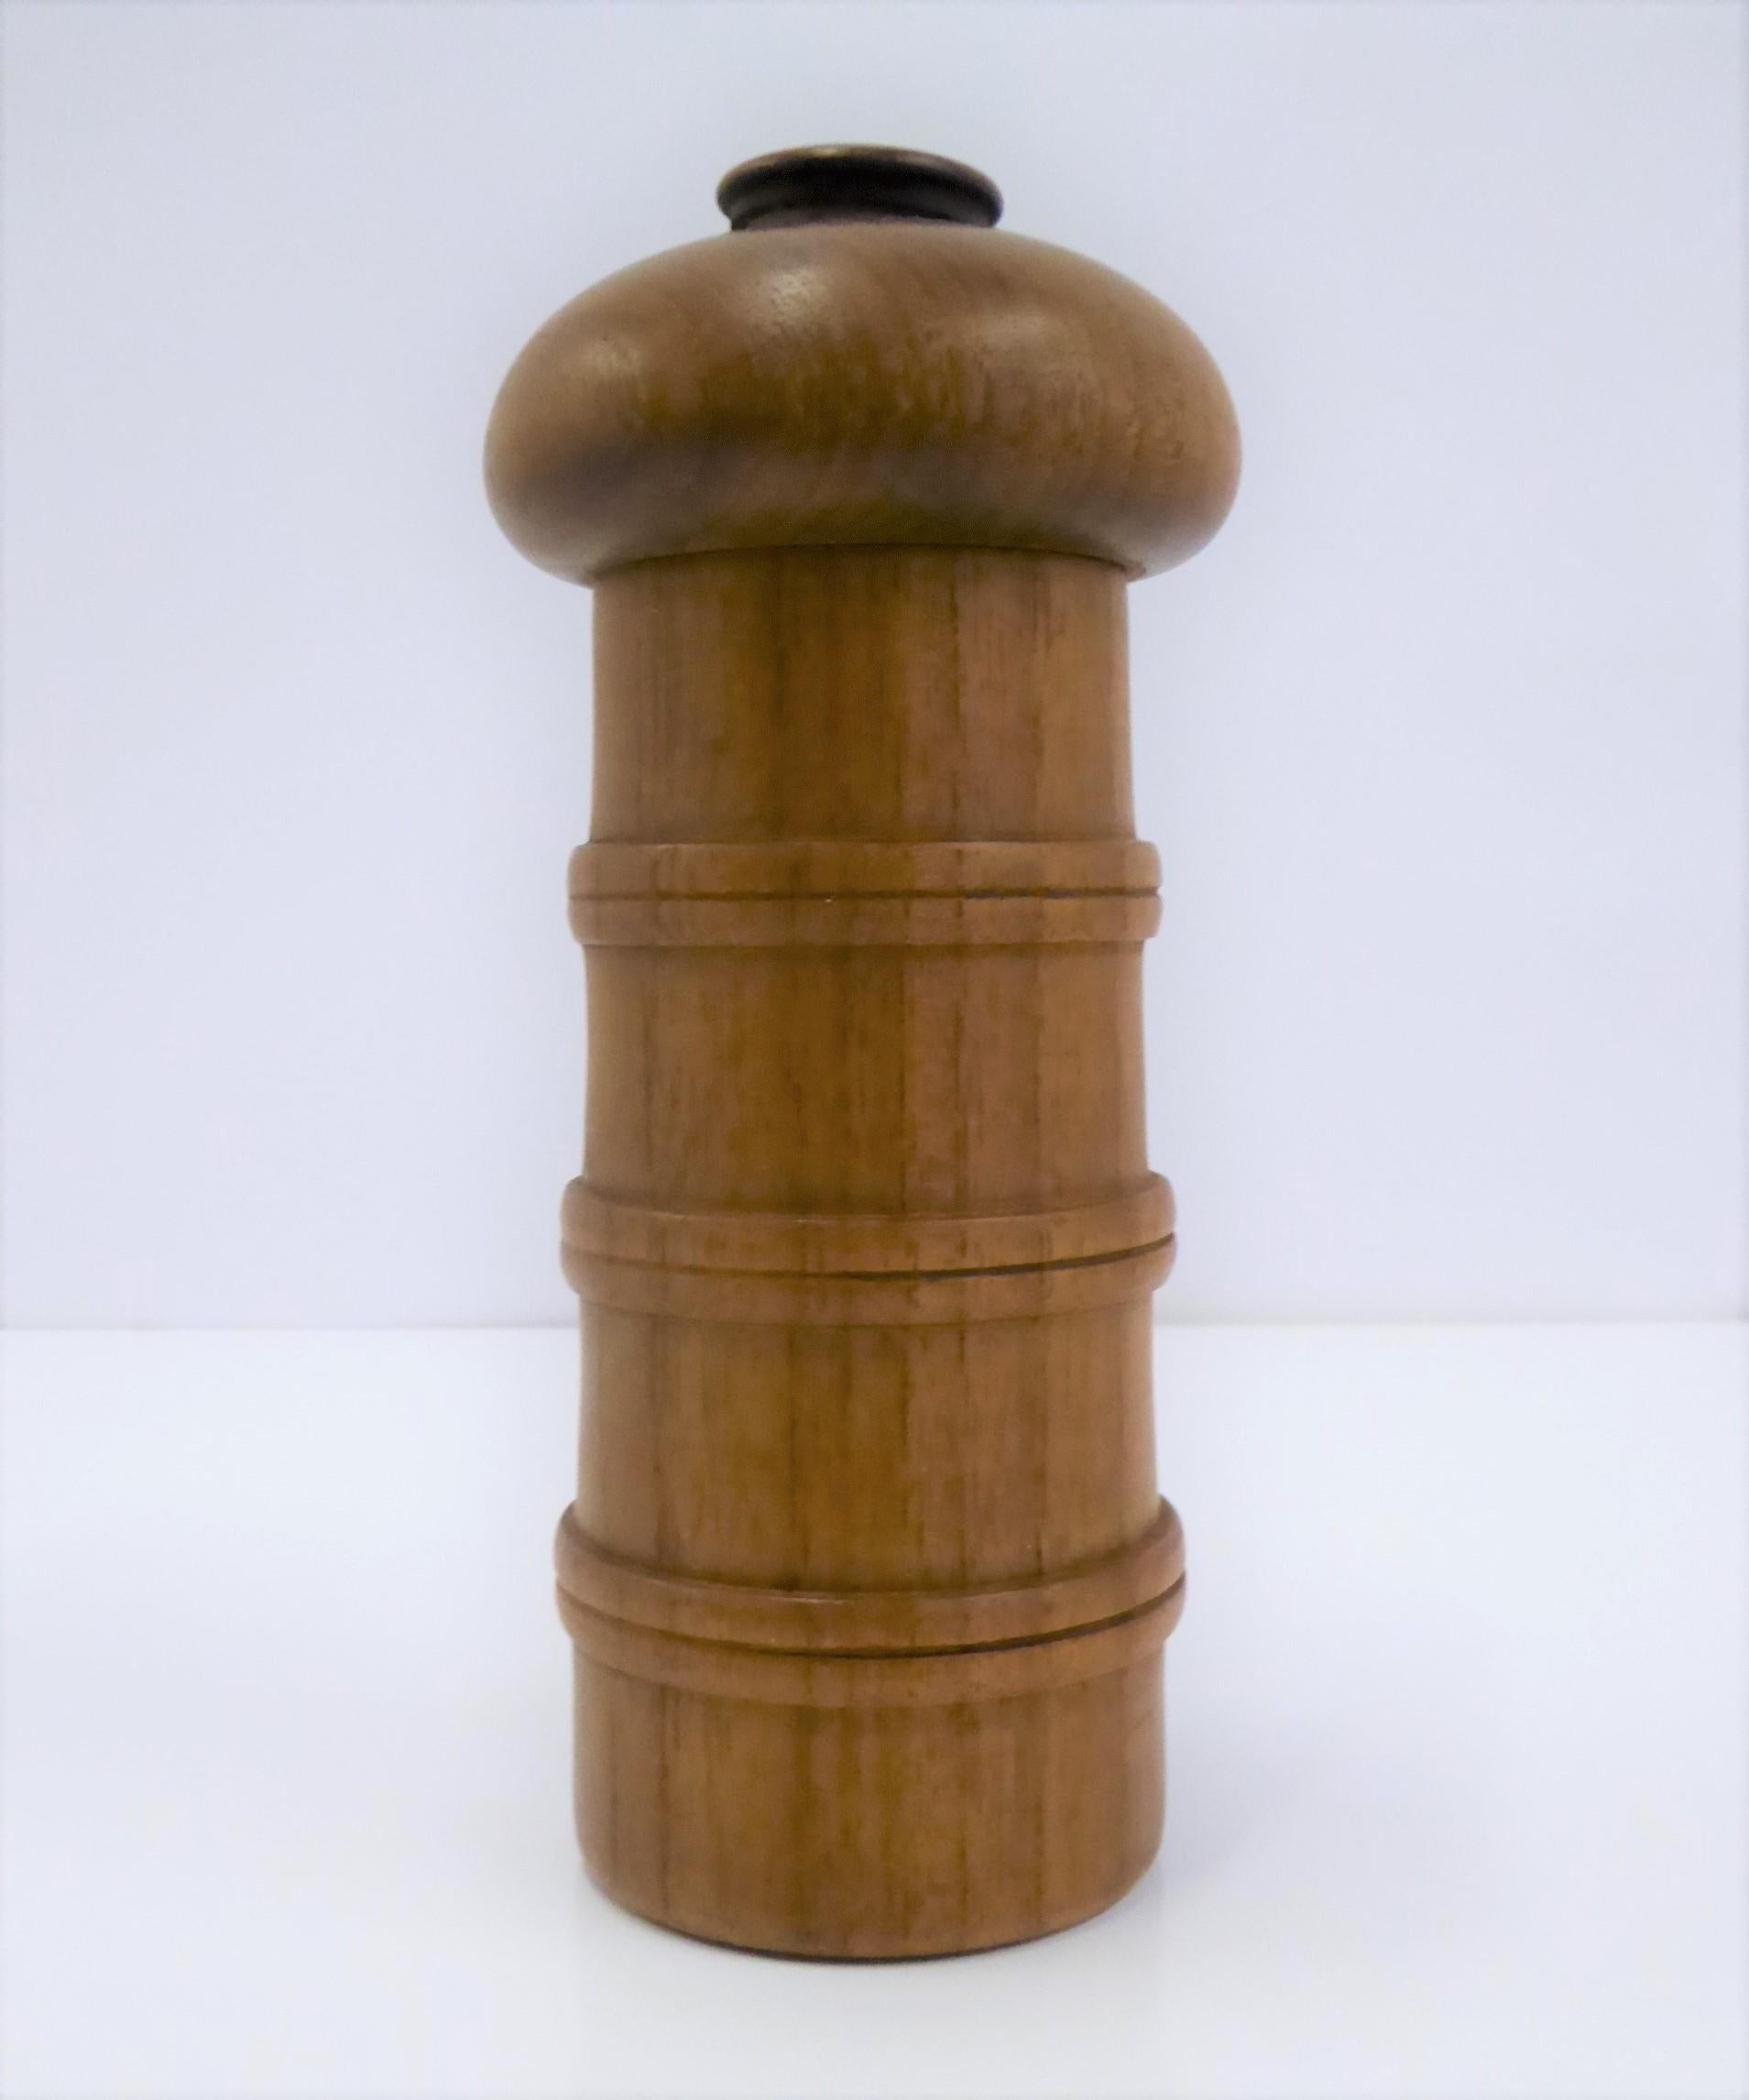 Great rare Mid-Century Modern Teak peppermill / salt Shaker combo by Jens Quistgaard for Dansk Designs. These peppermills sometimes are called Chess Pieces for the various shape resembling chess forms. Ground pepper comes out of the bottom when top